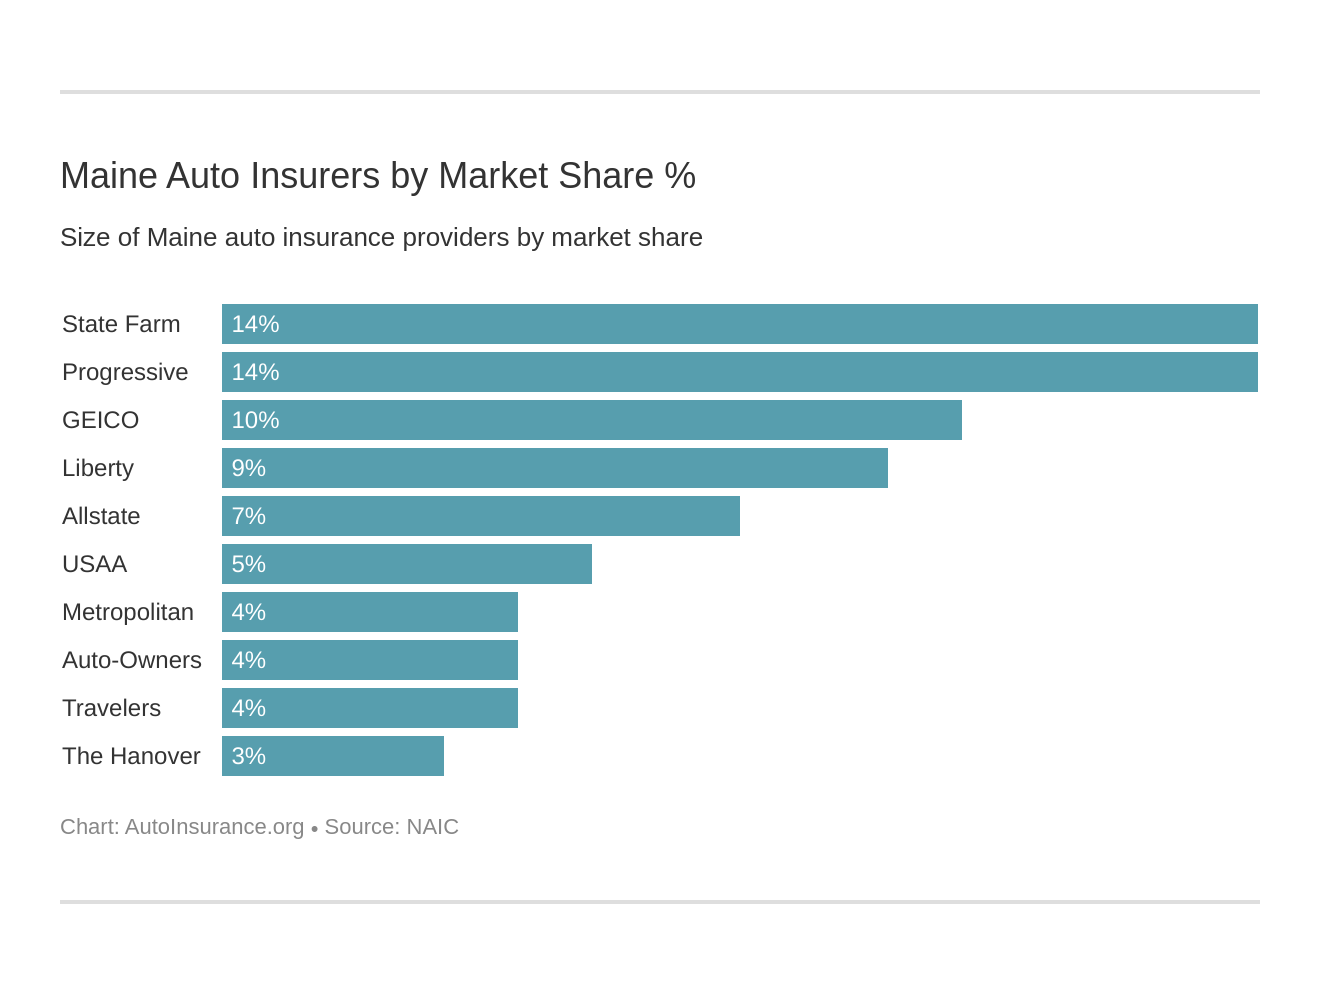 Maine Auto Insurers by Market Share %